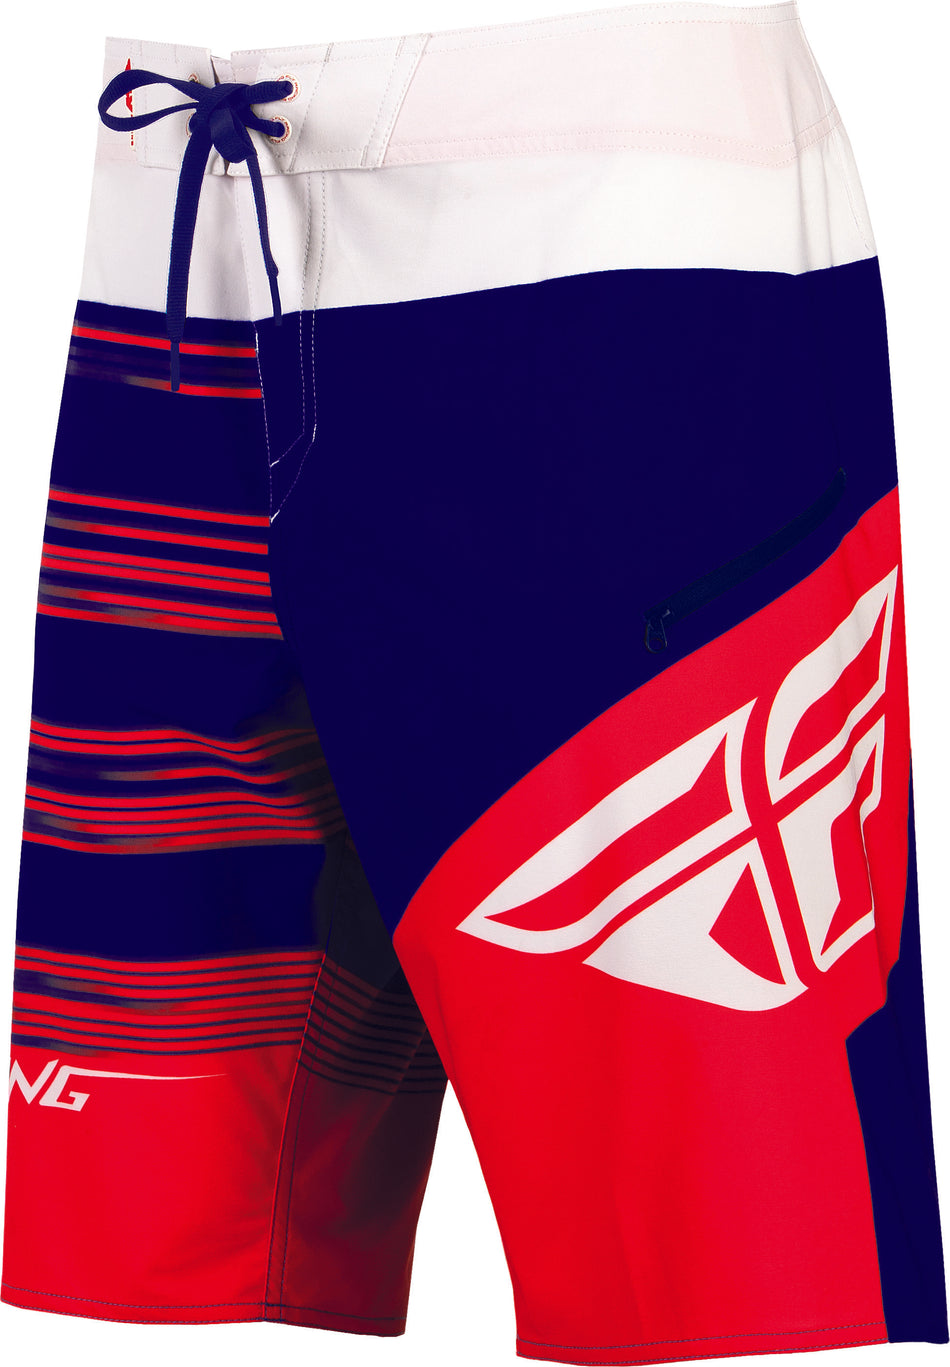 FLY RACING Influx Boardshorts Red/Blue/White Sz 40 353-19240